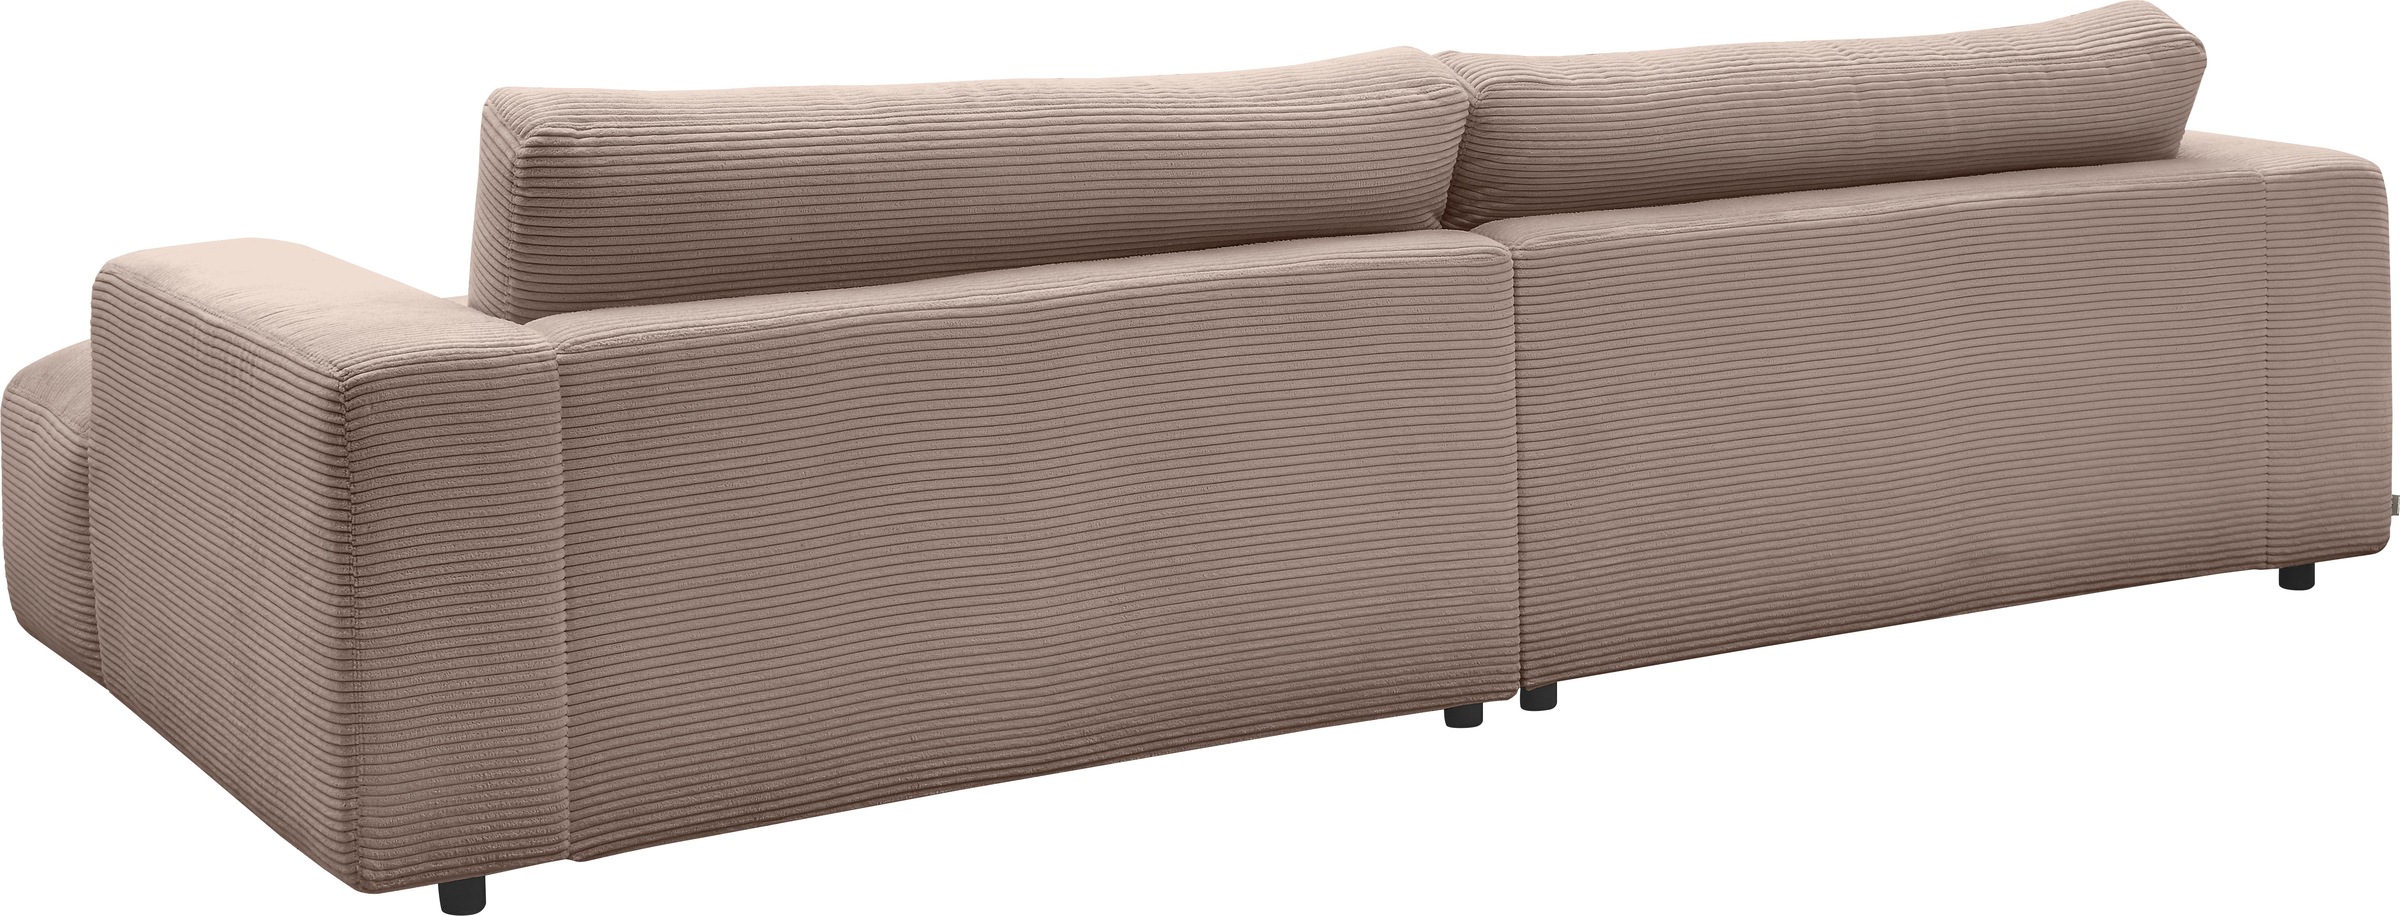 GALLERY branded »Lucia«, cm 292 Shop by OTTO Cord-Bezug, Online Loungesofa M Breite Musterring